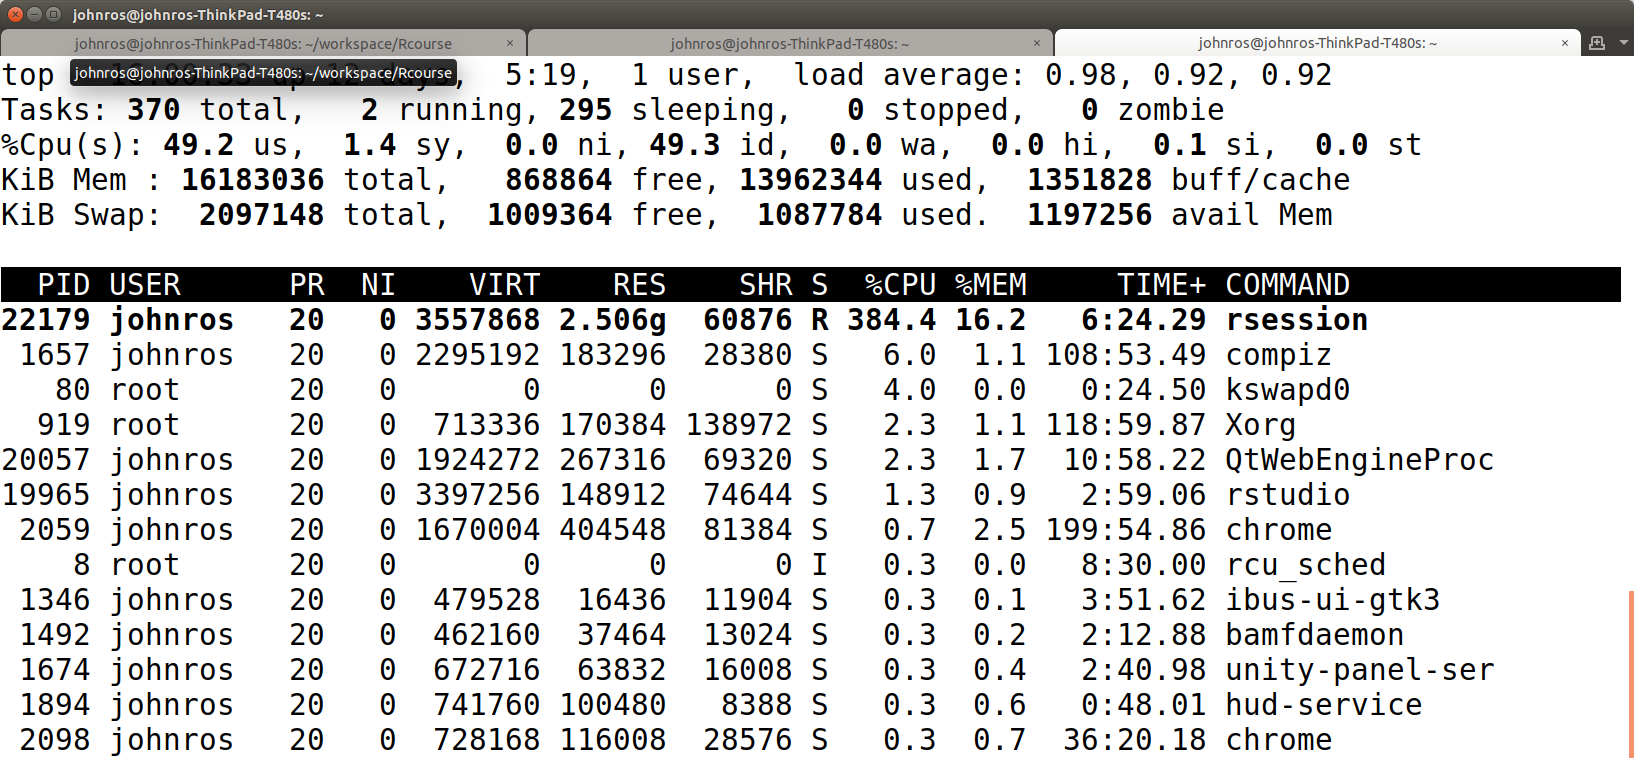 The CPU usage of fread() is 384.4%. This is because data.table is setup to use 4 threads simultanously.